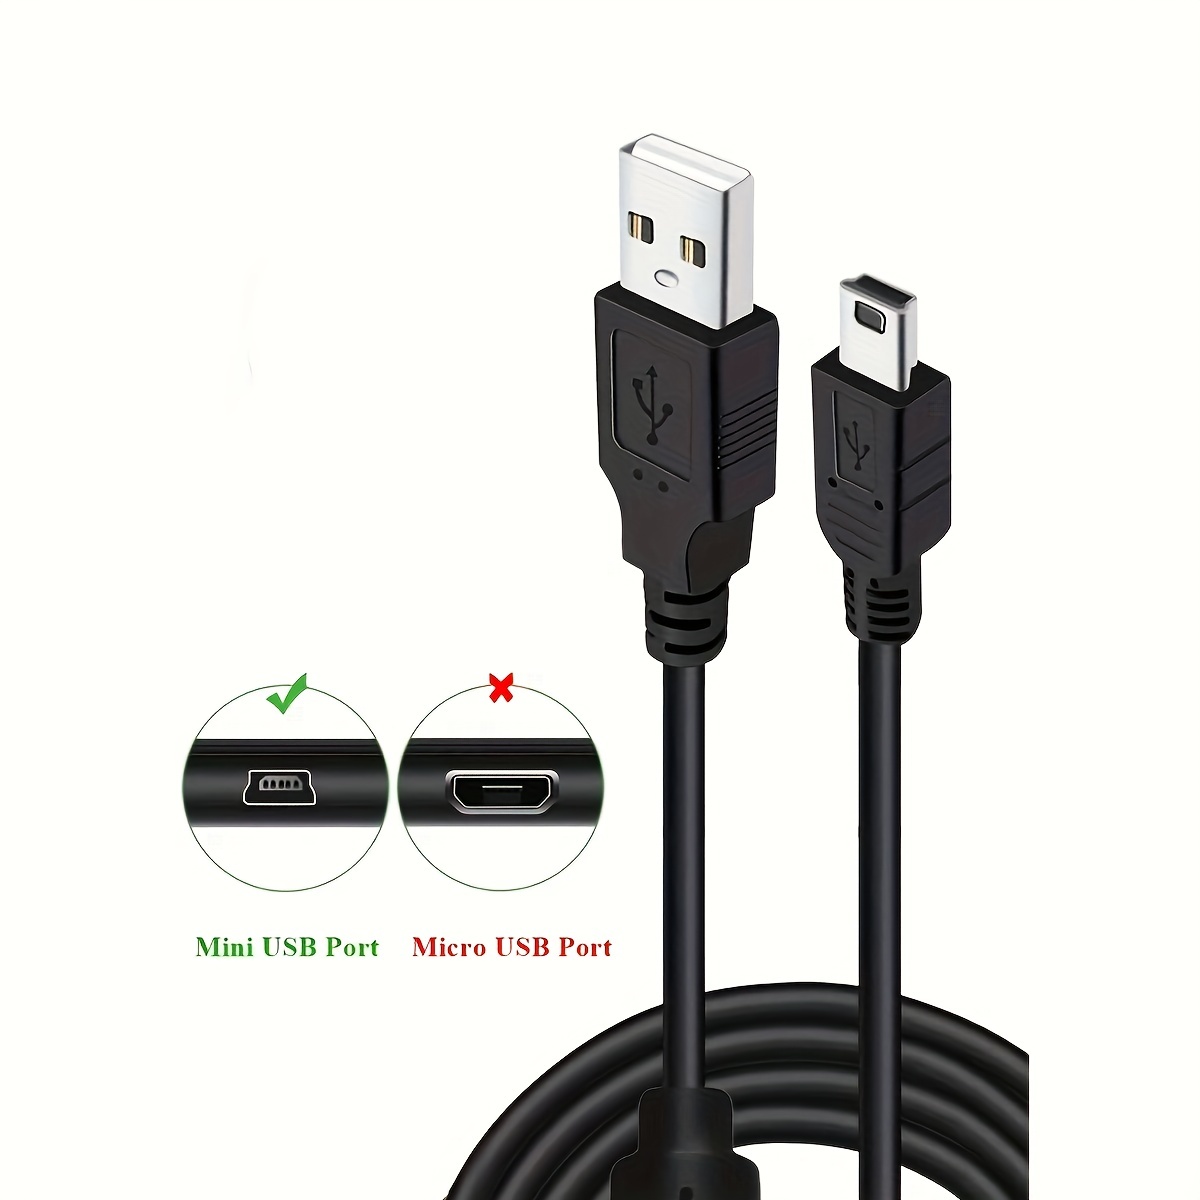 Cmple - 6ft Mini USB Cable USB A to Mini B Data Transfer USB Charging Cable  5 Pin Mini USB to USB Male to Male Cable for PC, Laptop, Car Dash Cam